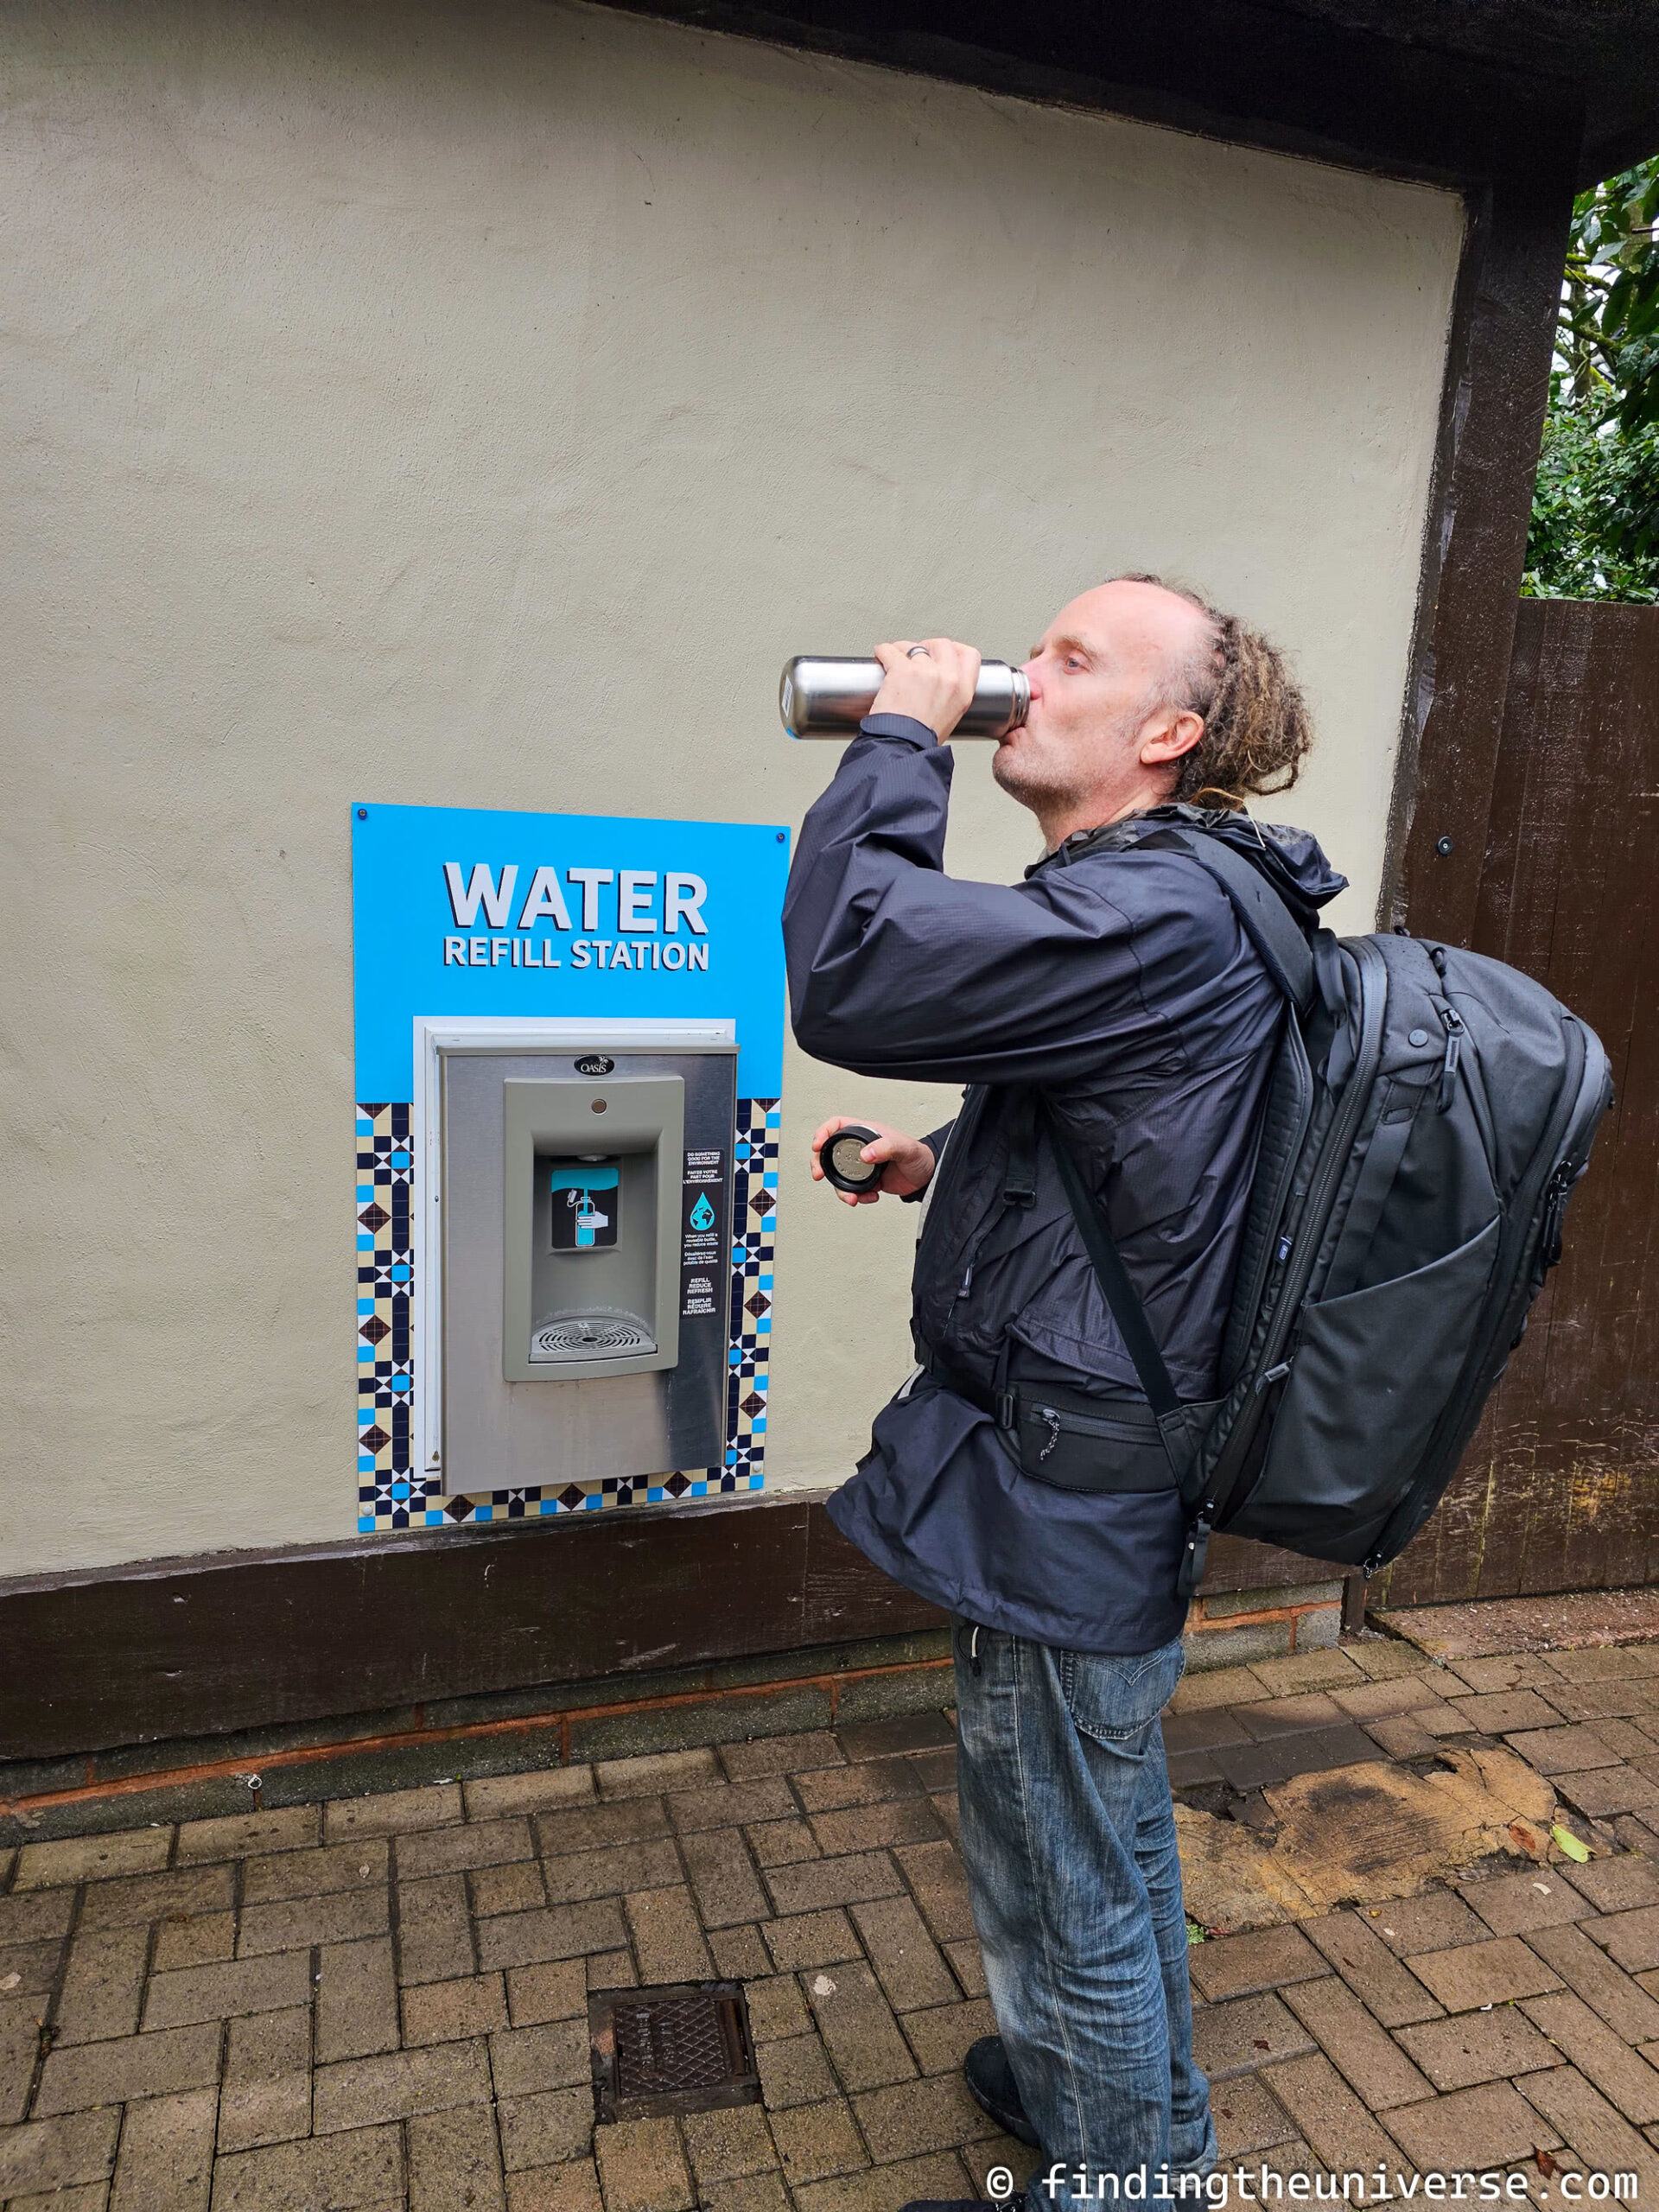 Water refill station Alton Towers by Laurence Norah